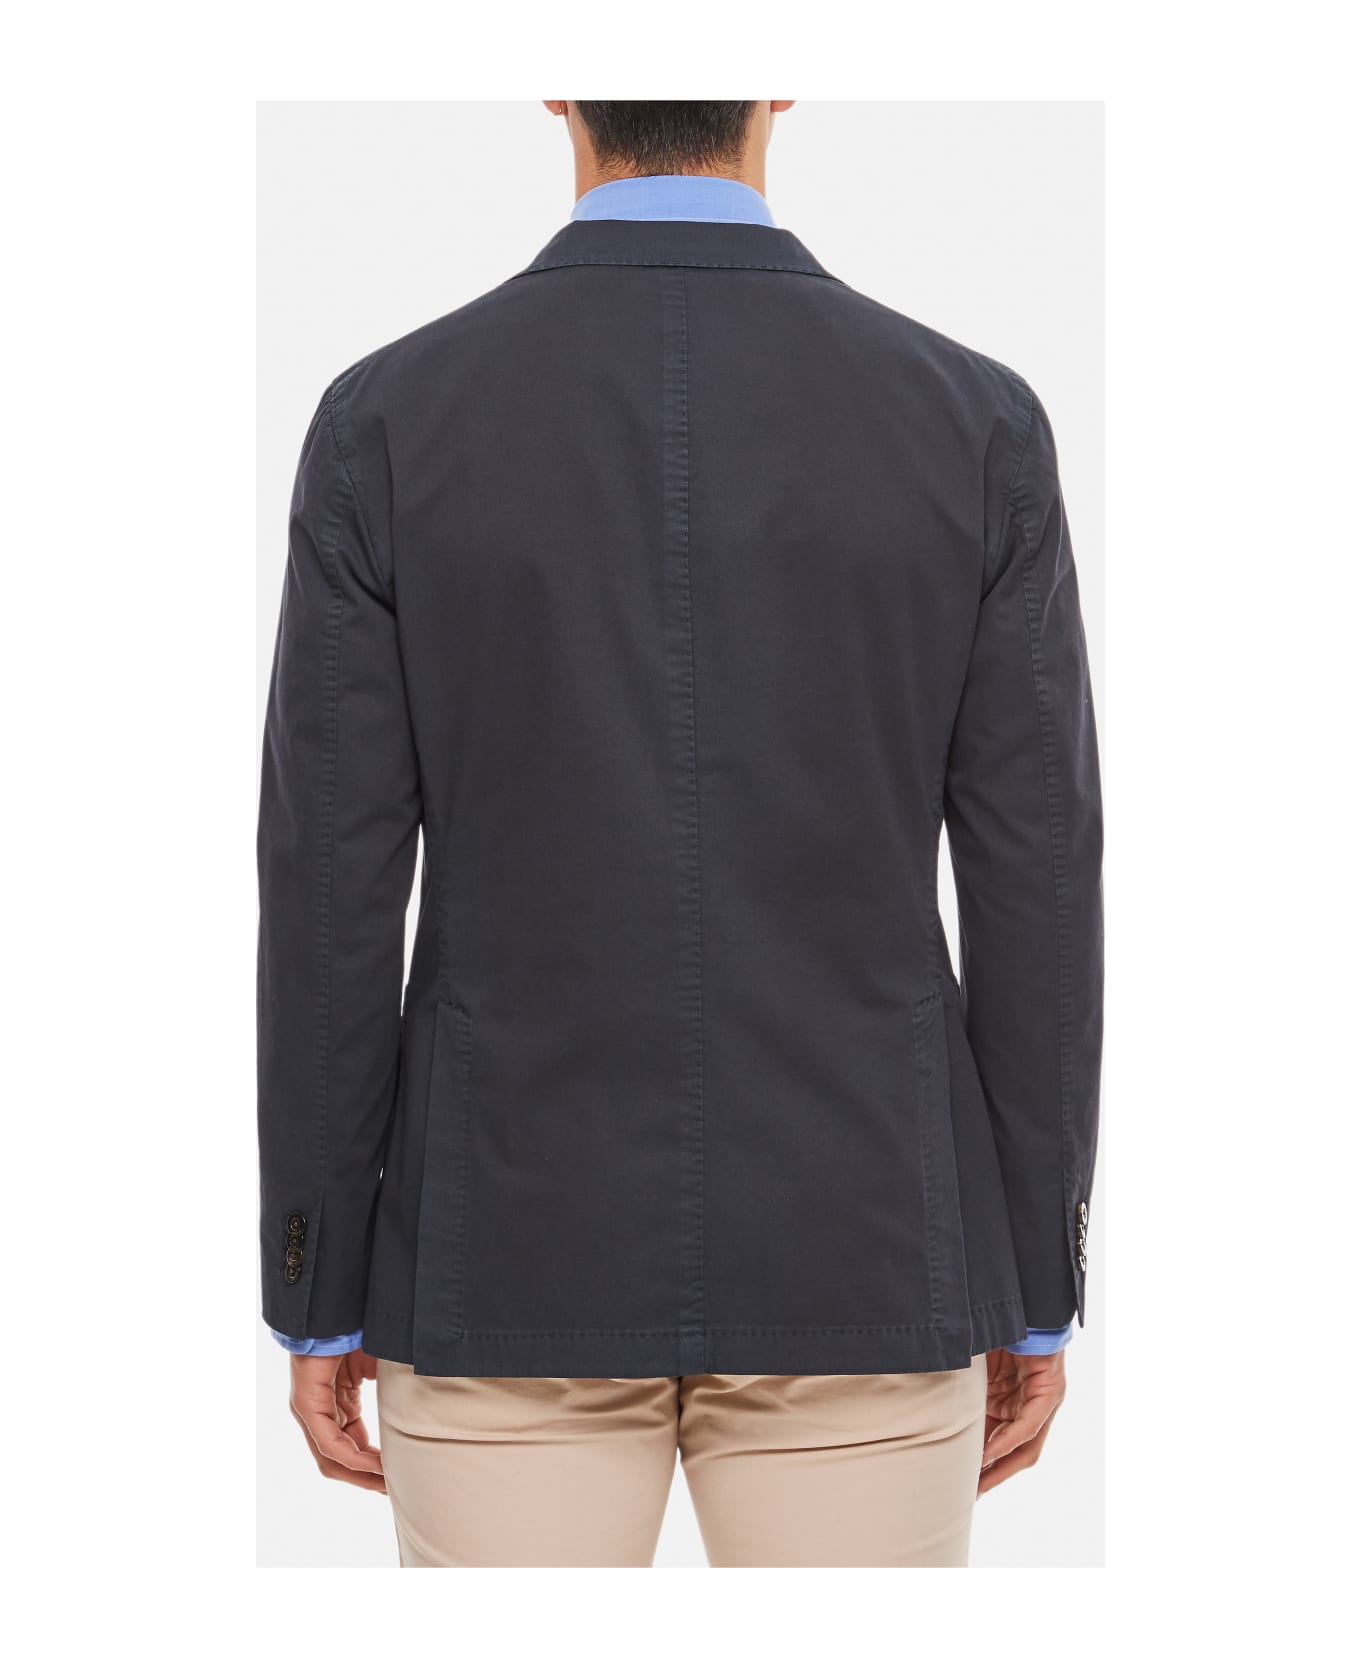 Boglioli Single-breasted Jacket In Stretch Cotton Twill, 2 Buttons - Blue